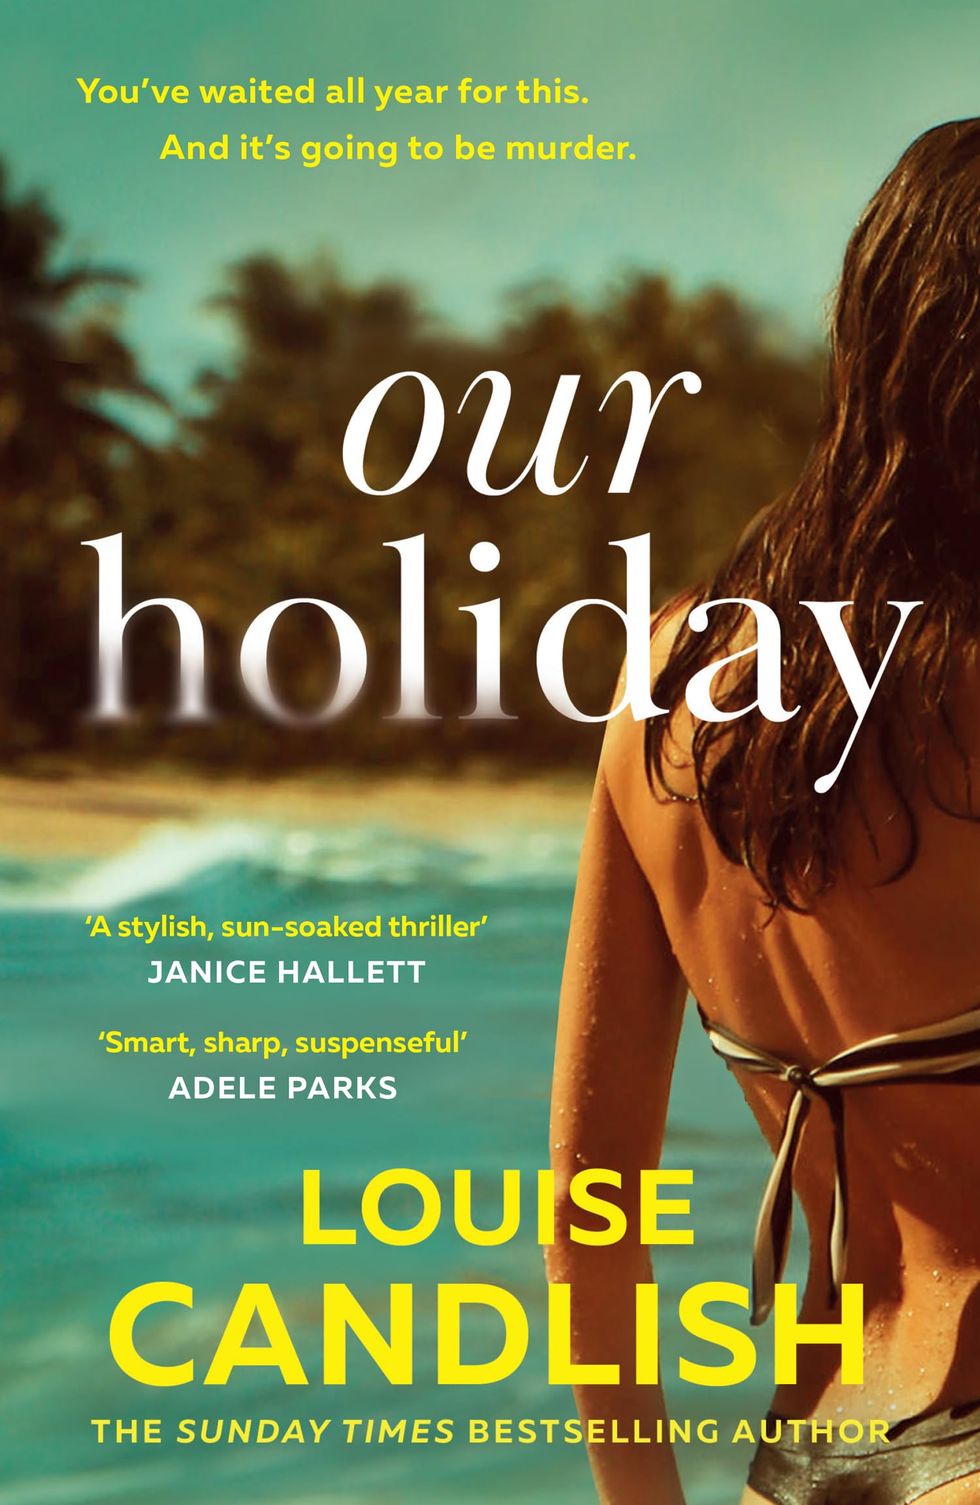 Our Holiday by Louise Candlish